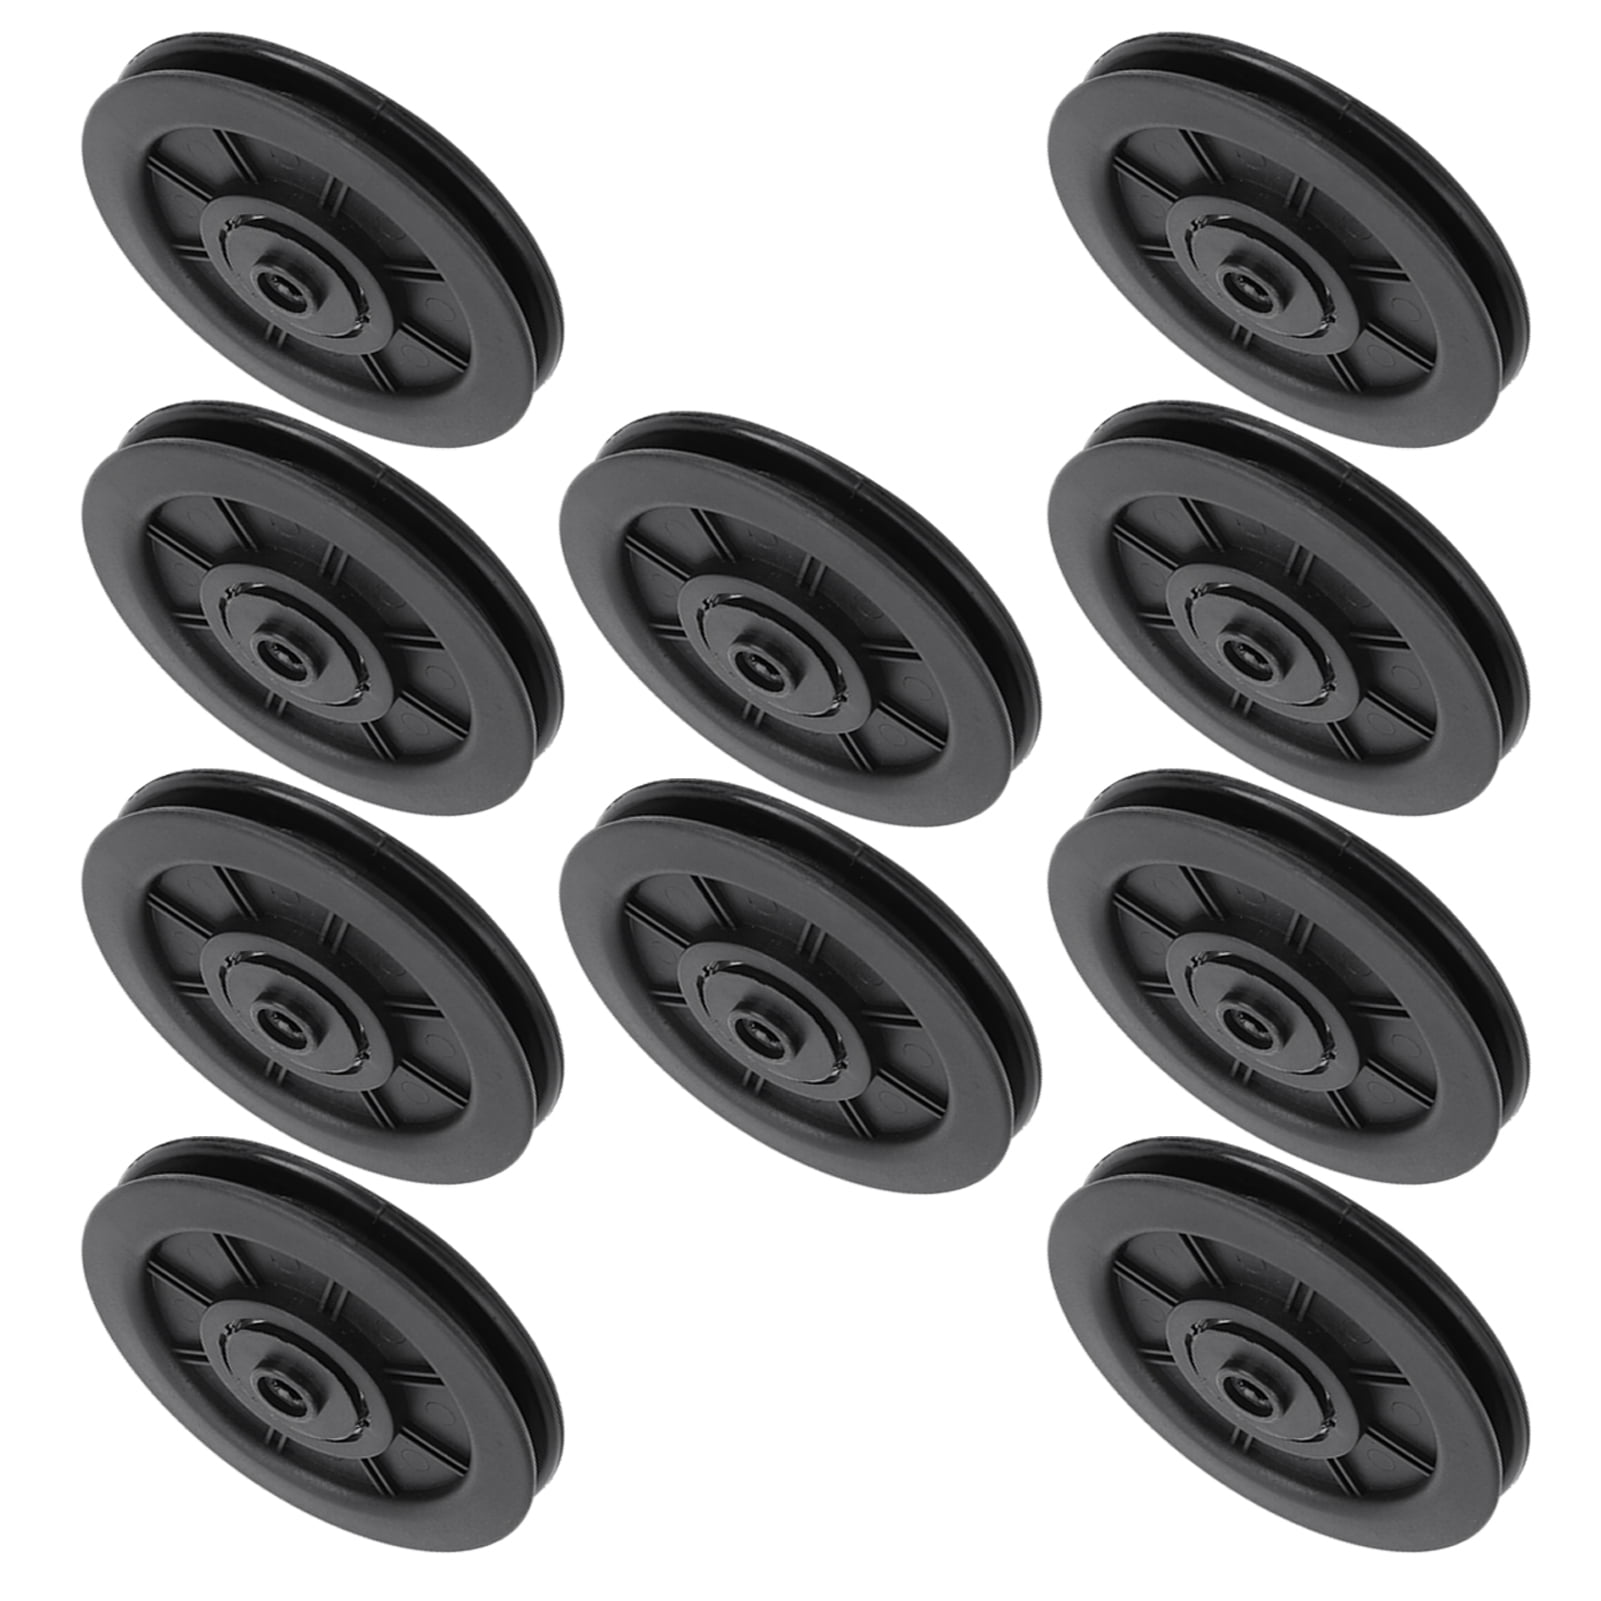 DAUERHAFT Nylon Bearing Pulley Wheel High Safety Performance 10Pcs/Set 100MM,Necessity Replacement for Fitness Equipment 